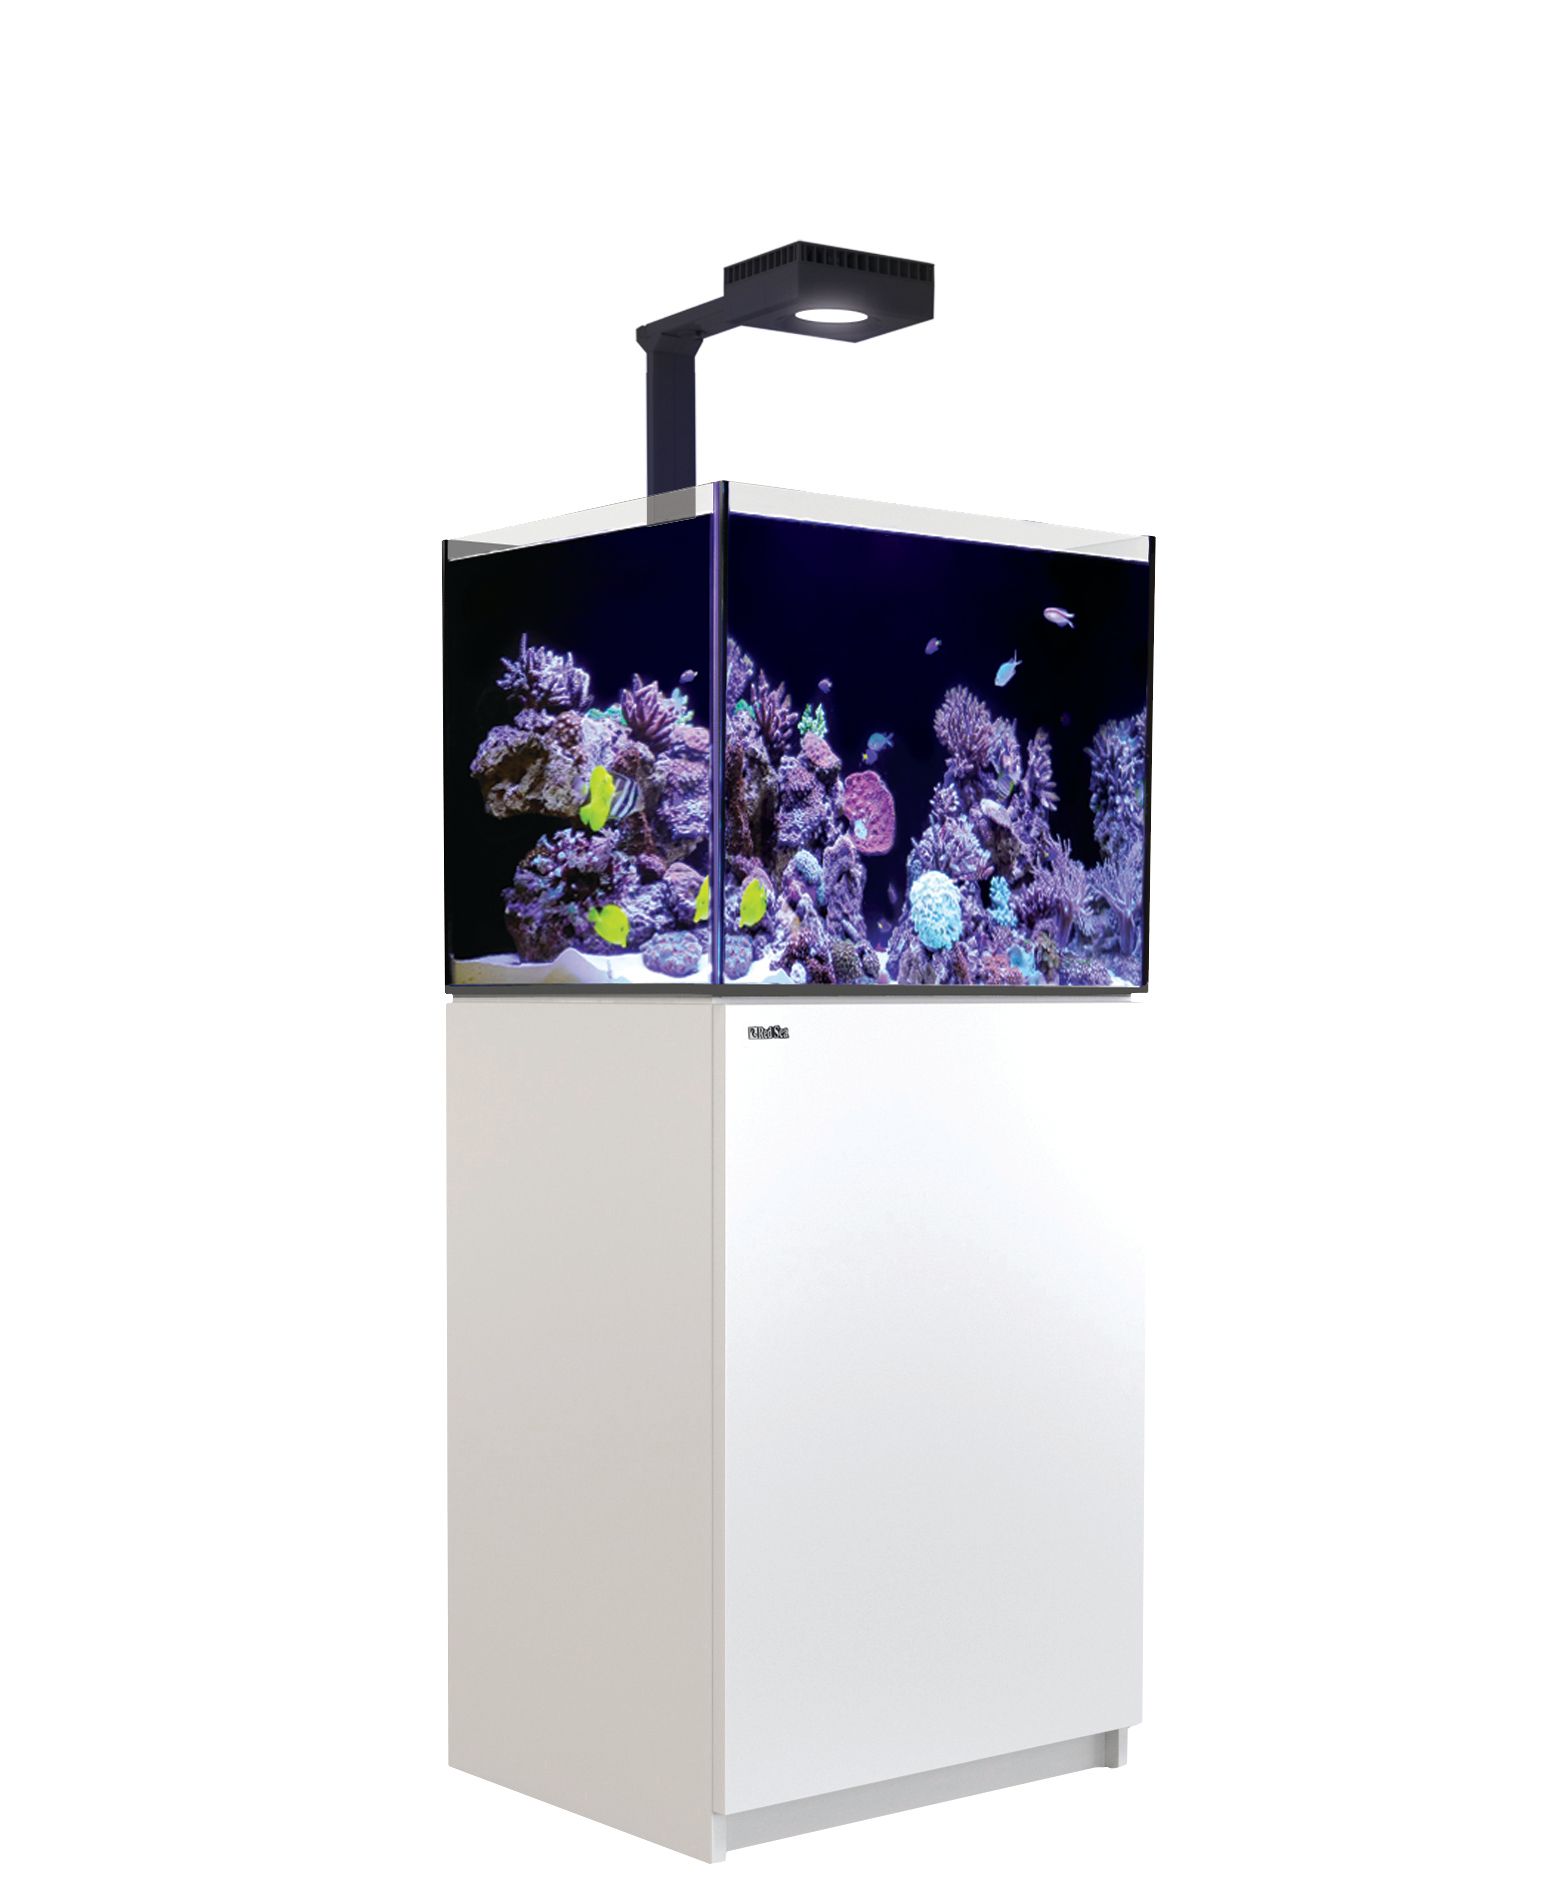 RED SEA Reefer 170 G2+ Deluxe Complete System Aquarium